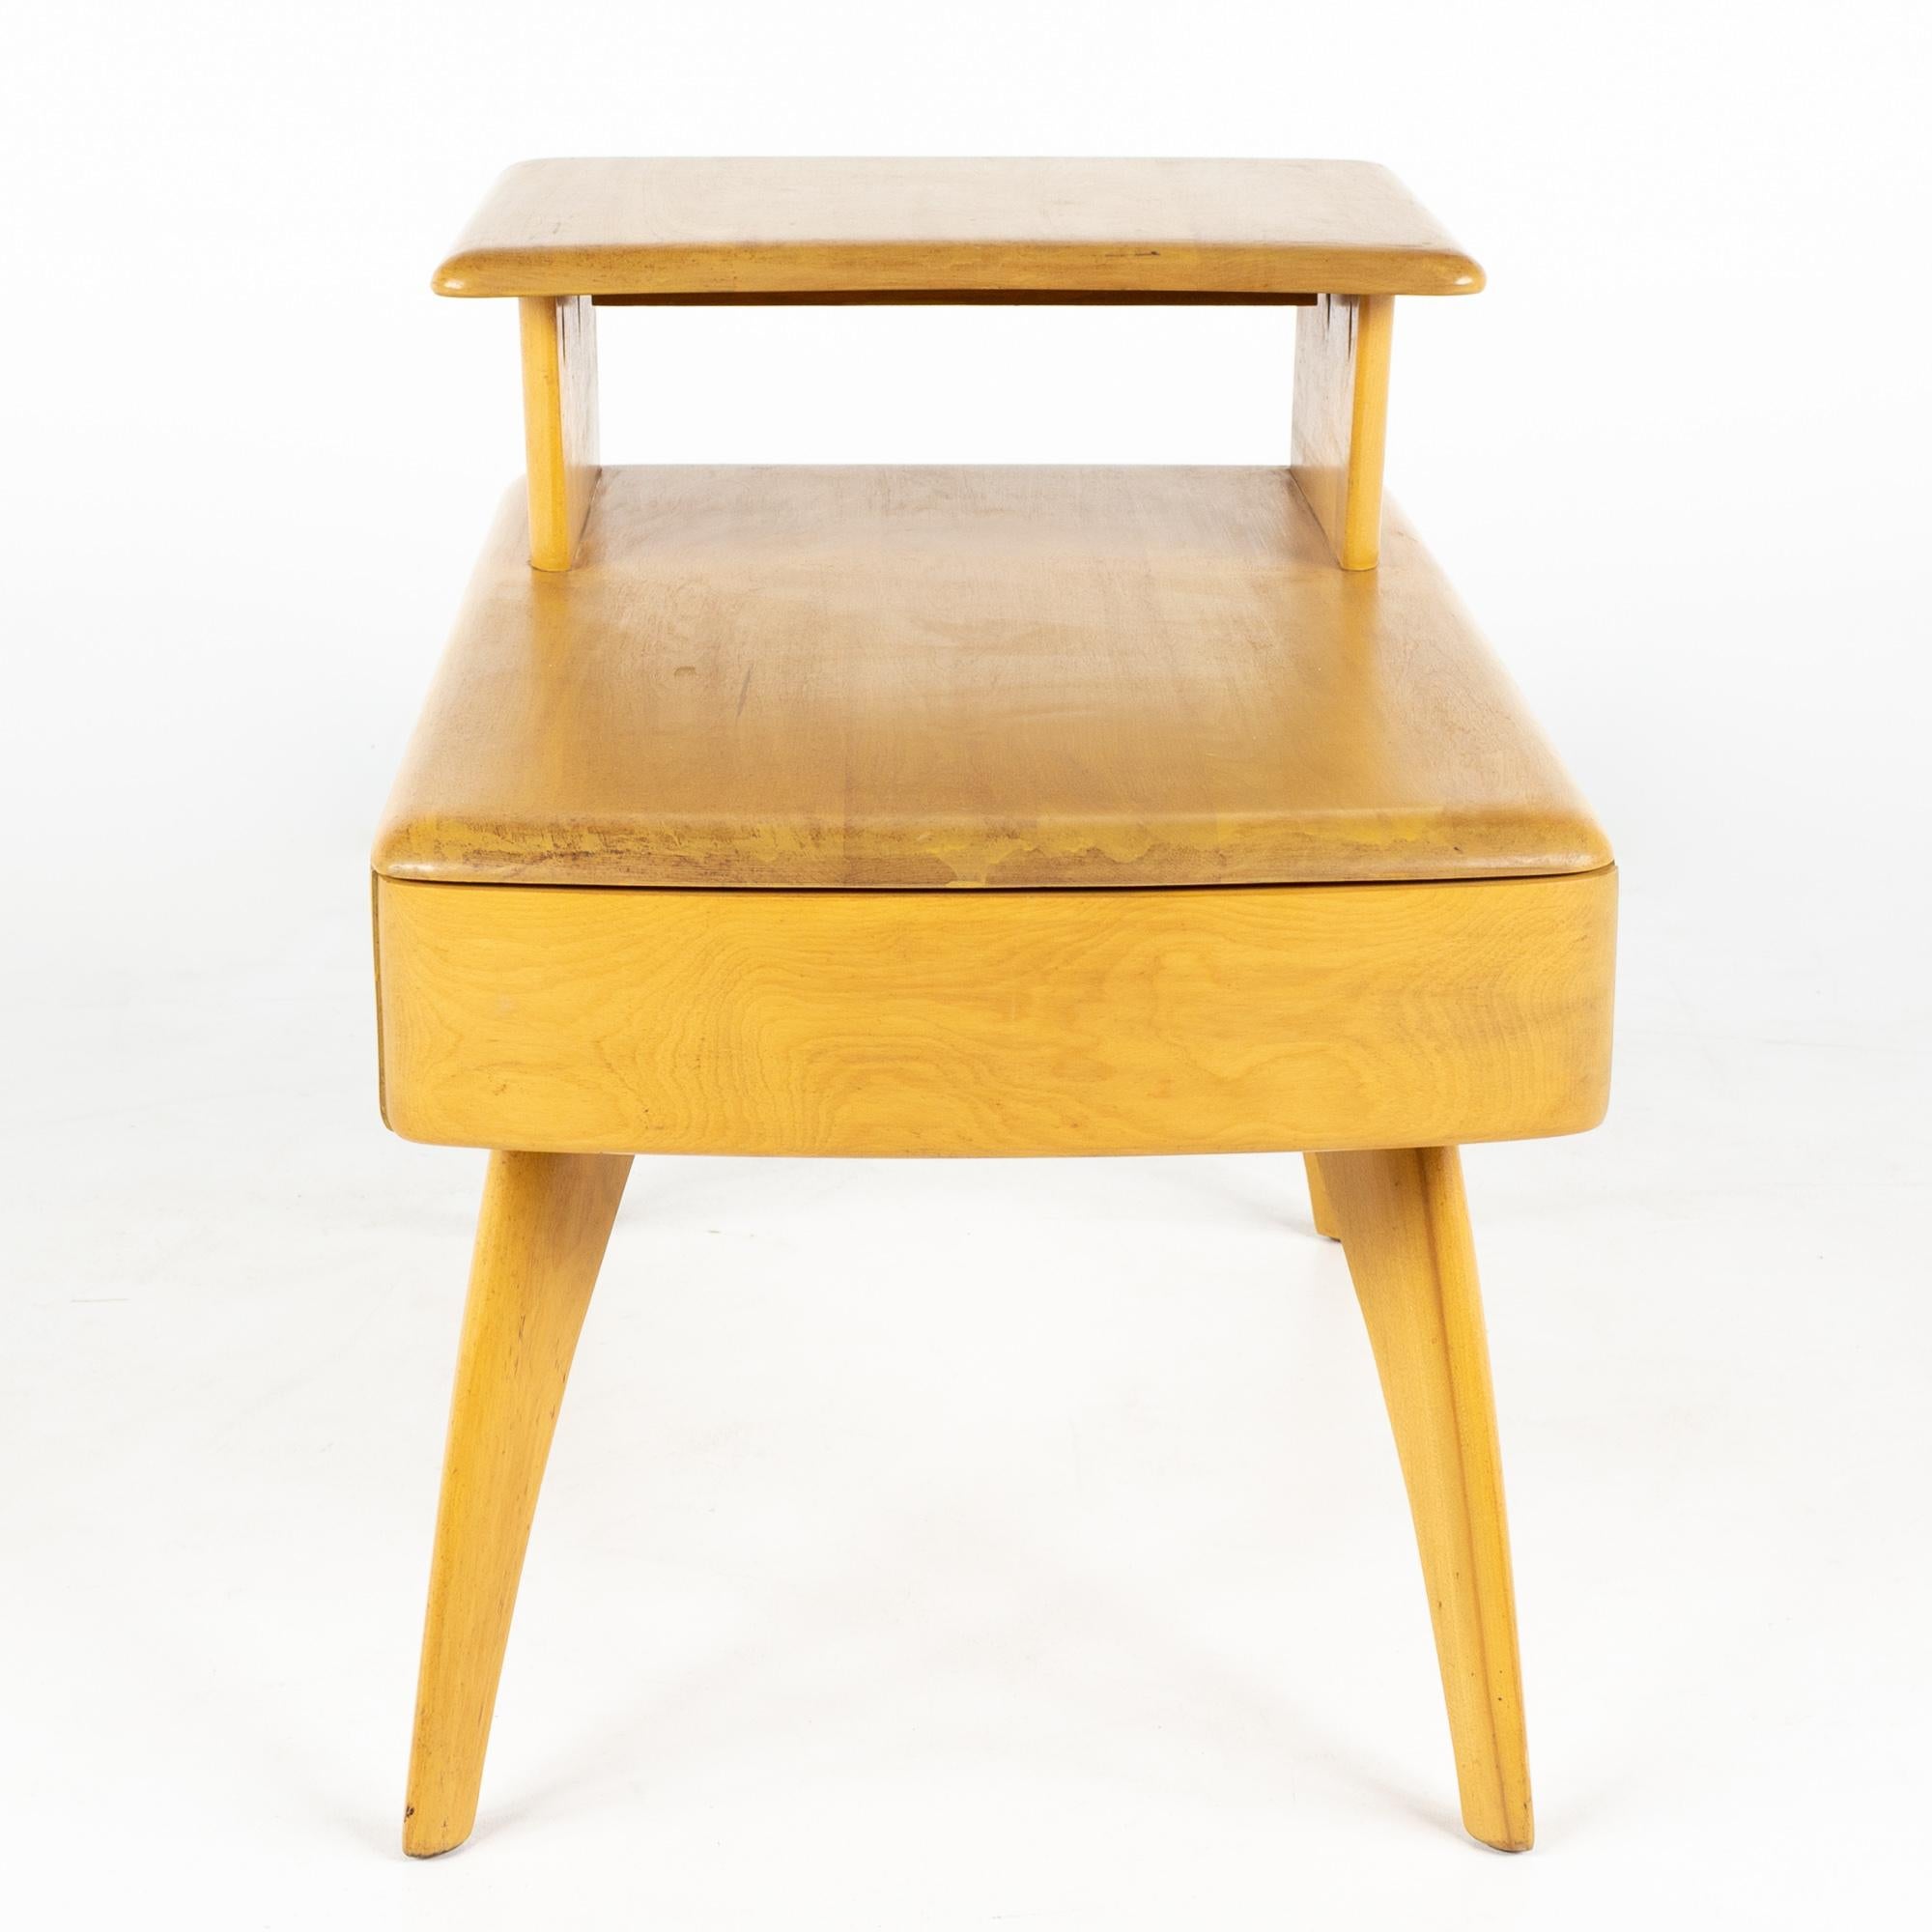 Heywood Wakefield mid century wheat step side table with drawer

This table measures: 18.5 wide x 30.5 deep x 23 inches high

All pieces of furniture can be had in what we call restored vintage condition. That means the piece is restored upon